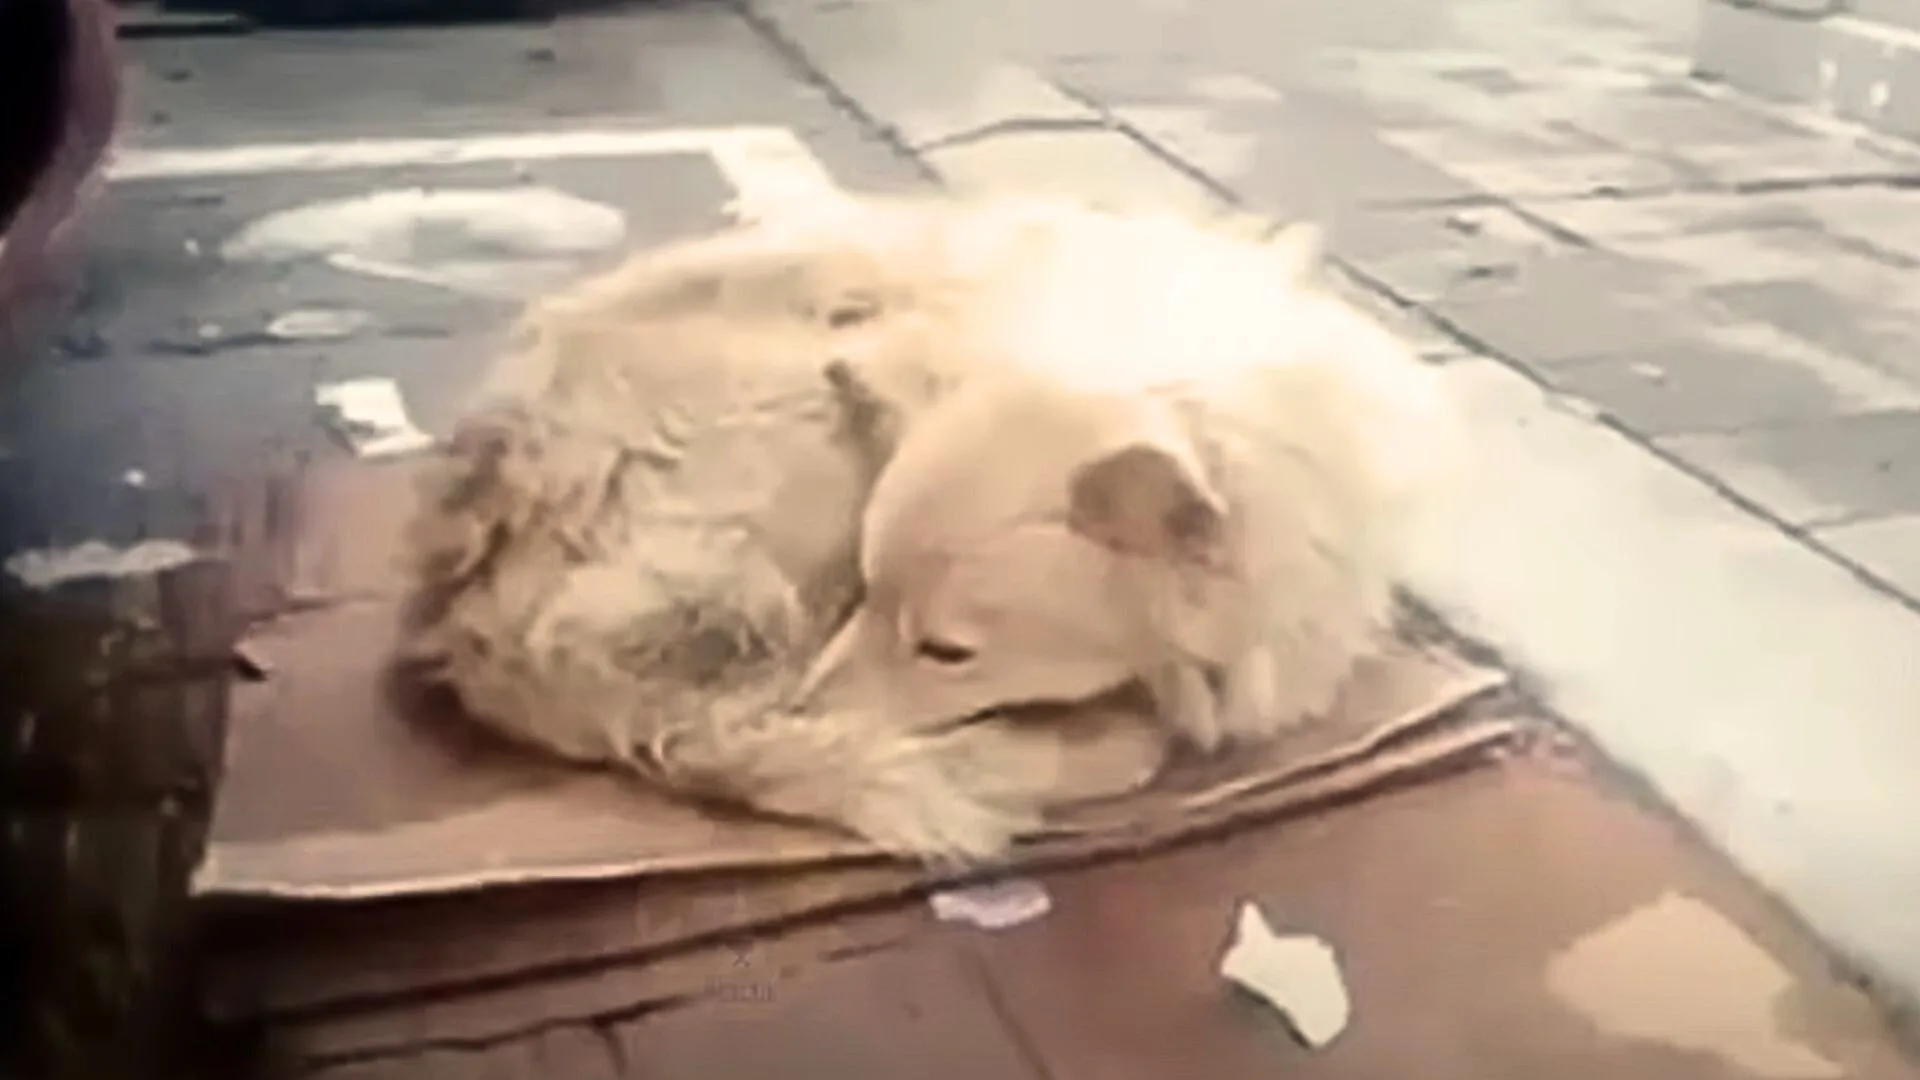 A Dog Abandoned On The Street In Freezing Weather Is Hoping Her Owner Would Come Back